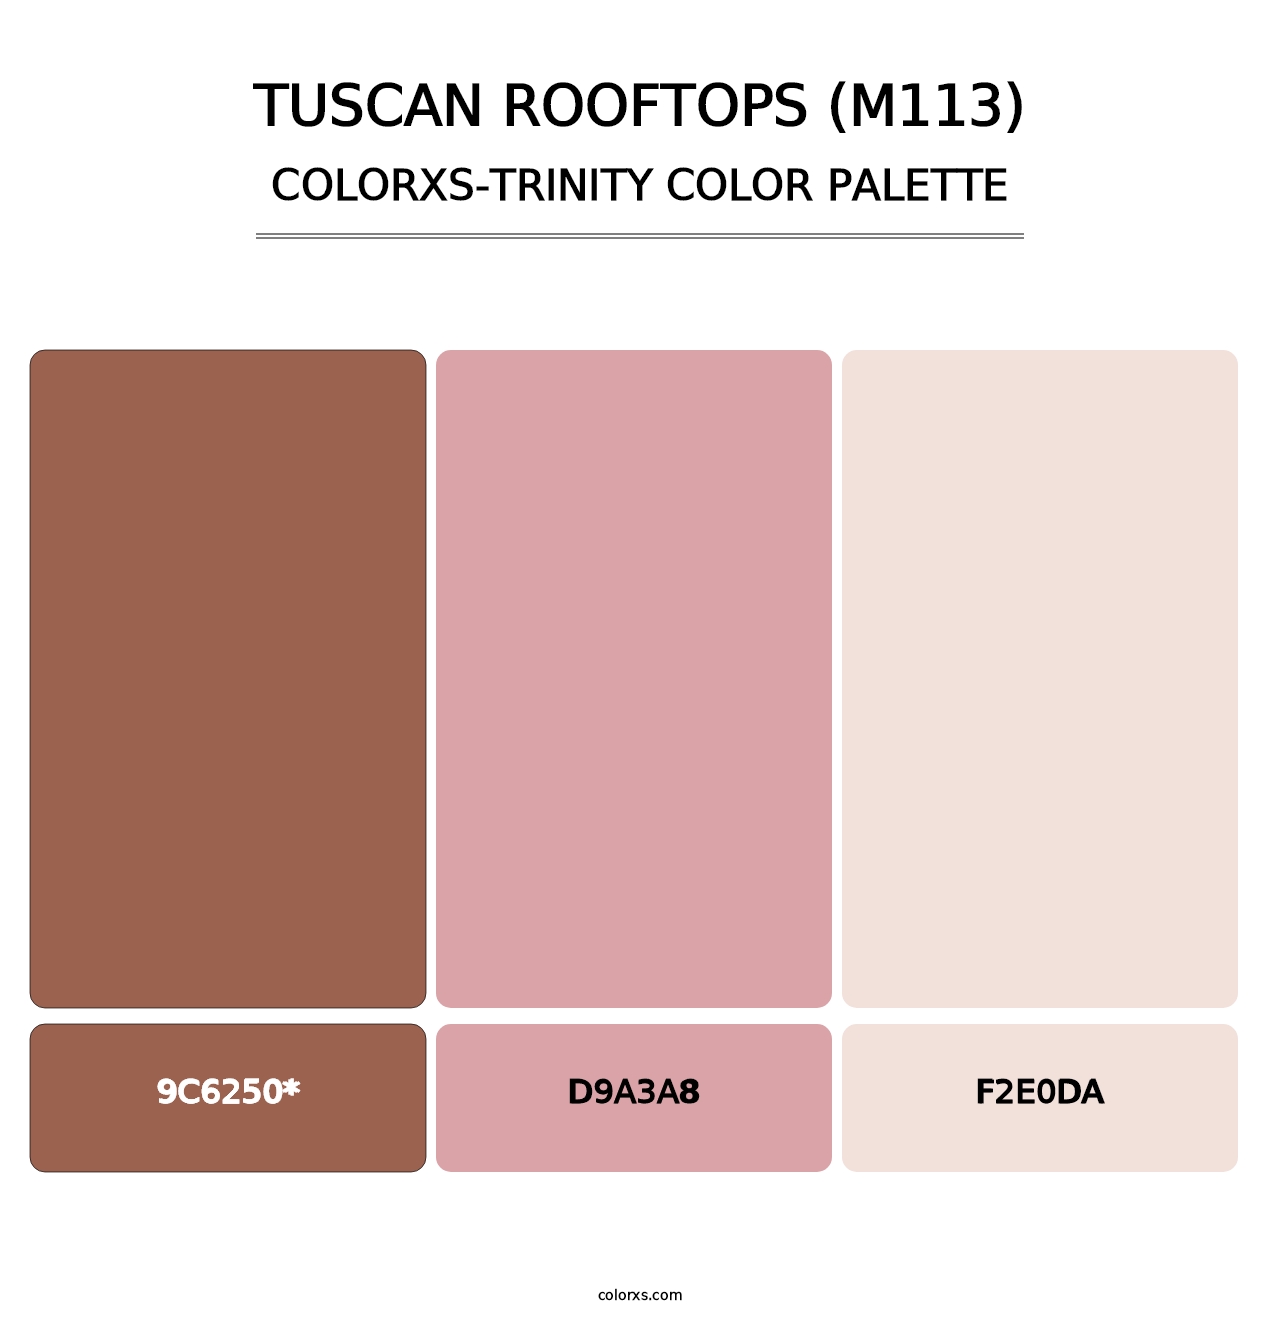 Tuscan Rooftops (M113) - Colorxs Trinity Palette